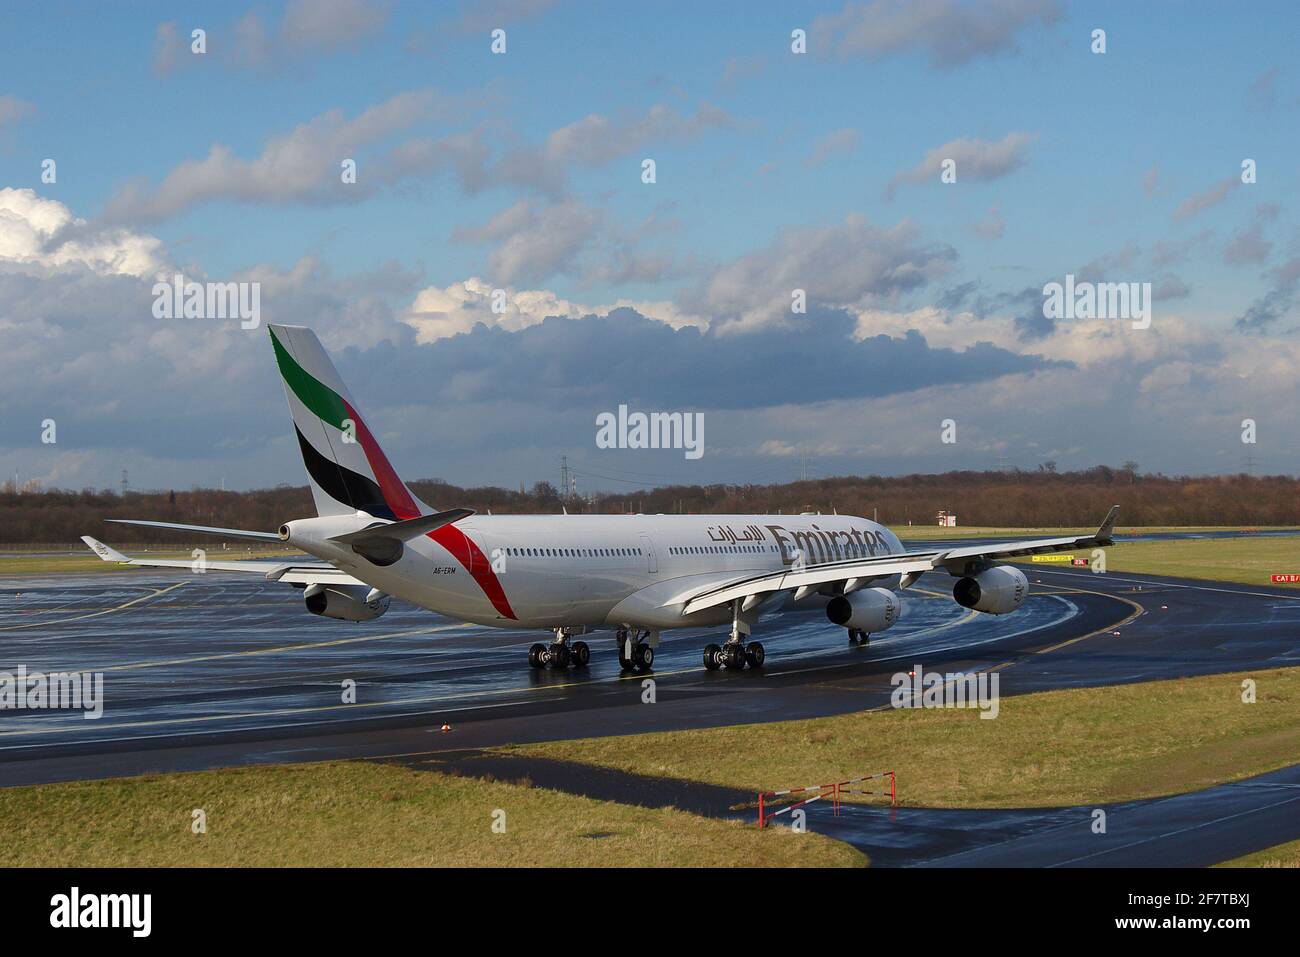 Düsseldorf, Germany - February 24, 2007: Airbus A340-313X of Emirates at the airport of Düsseldorf reaching the runway after taxiing Stock Photo